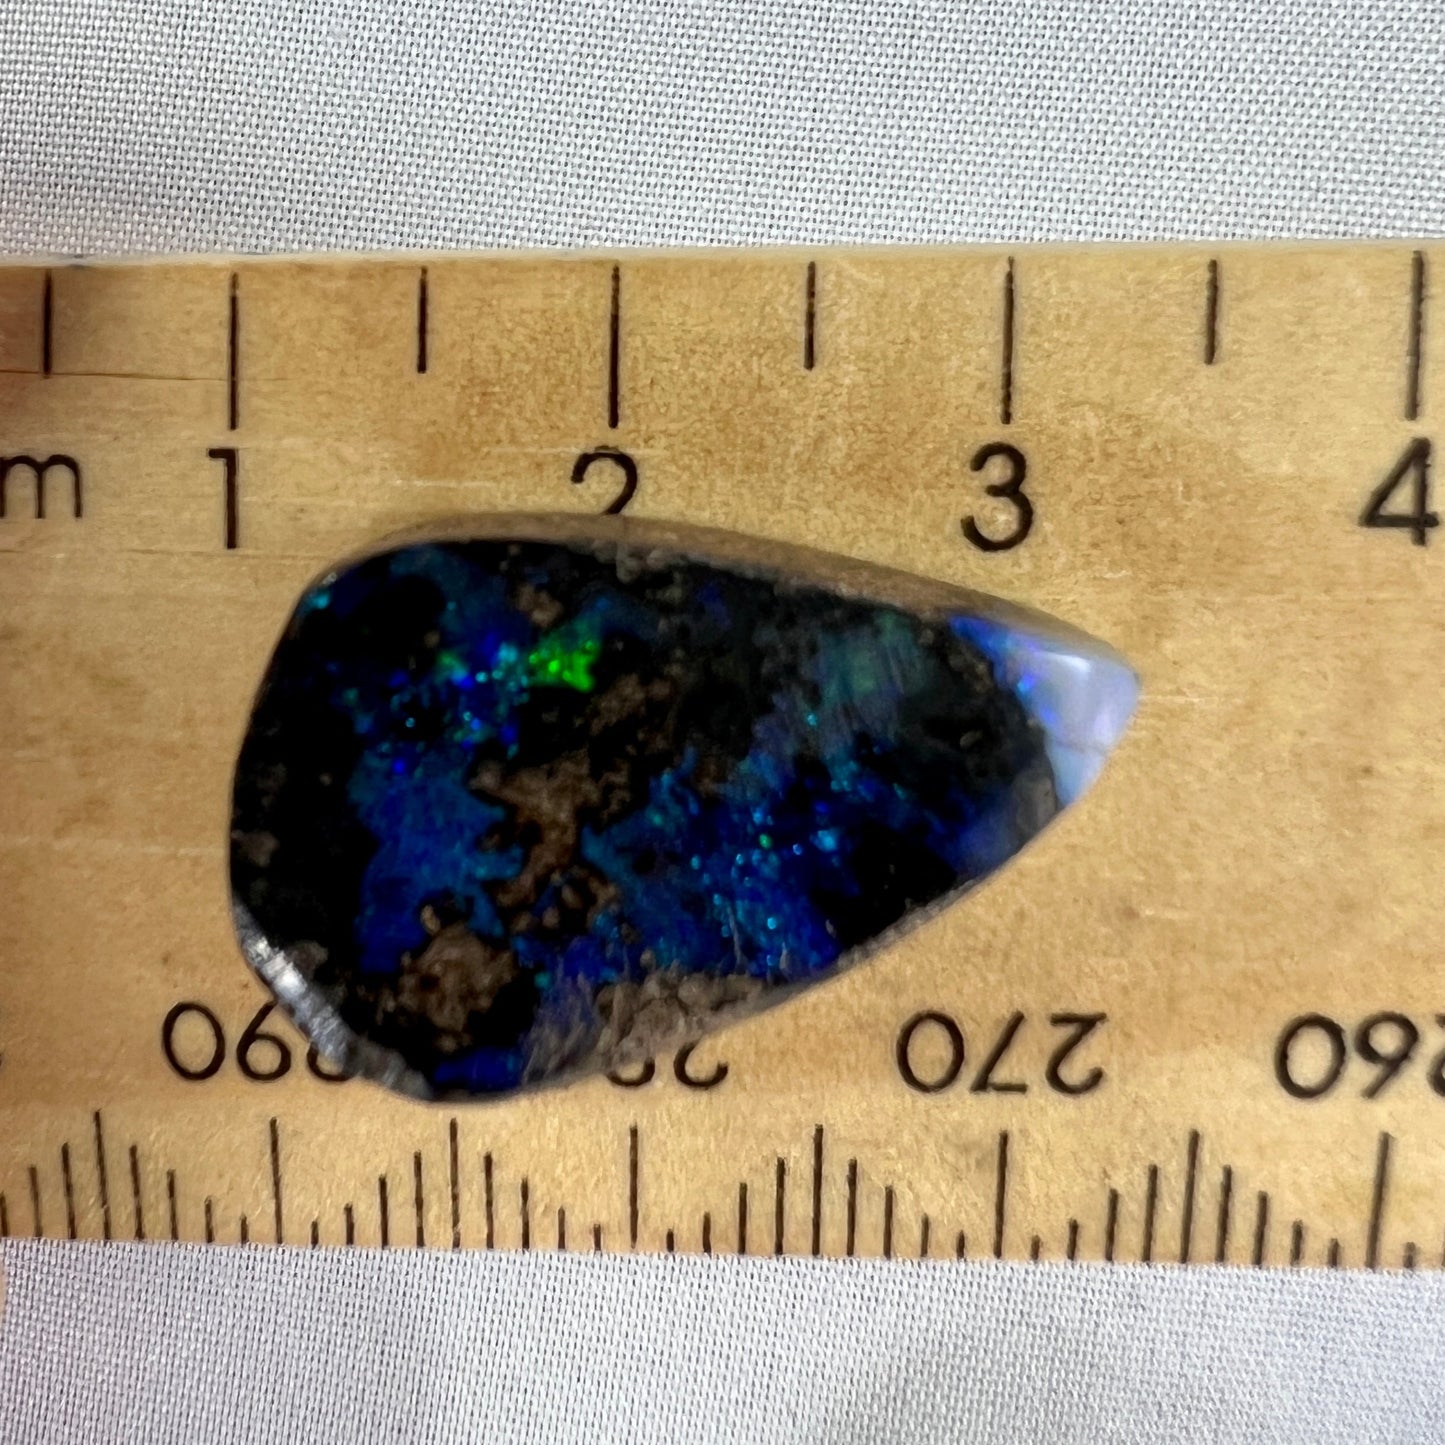 A nice 12ct Winton boulder opal displaying blues and greens. Polished and ready to set.